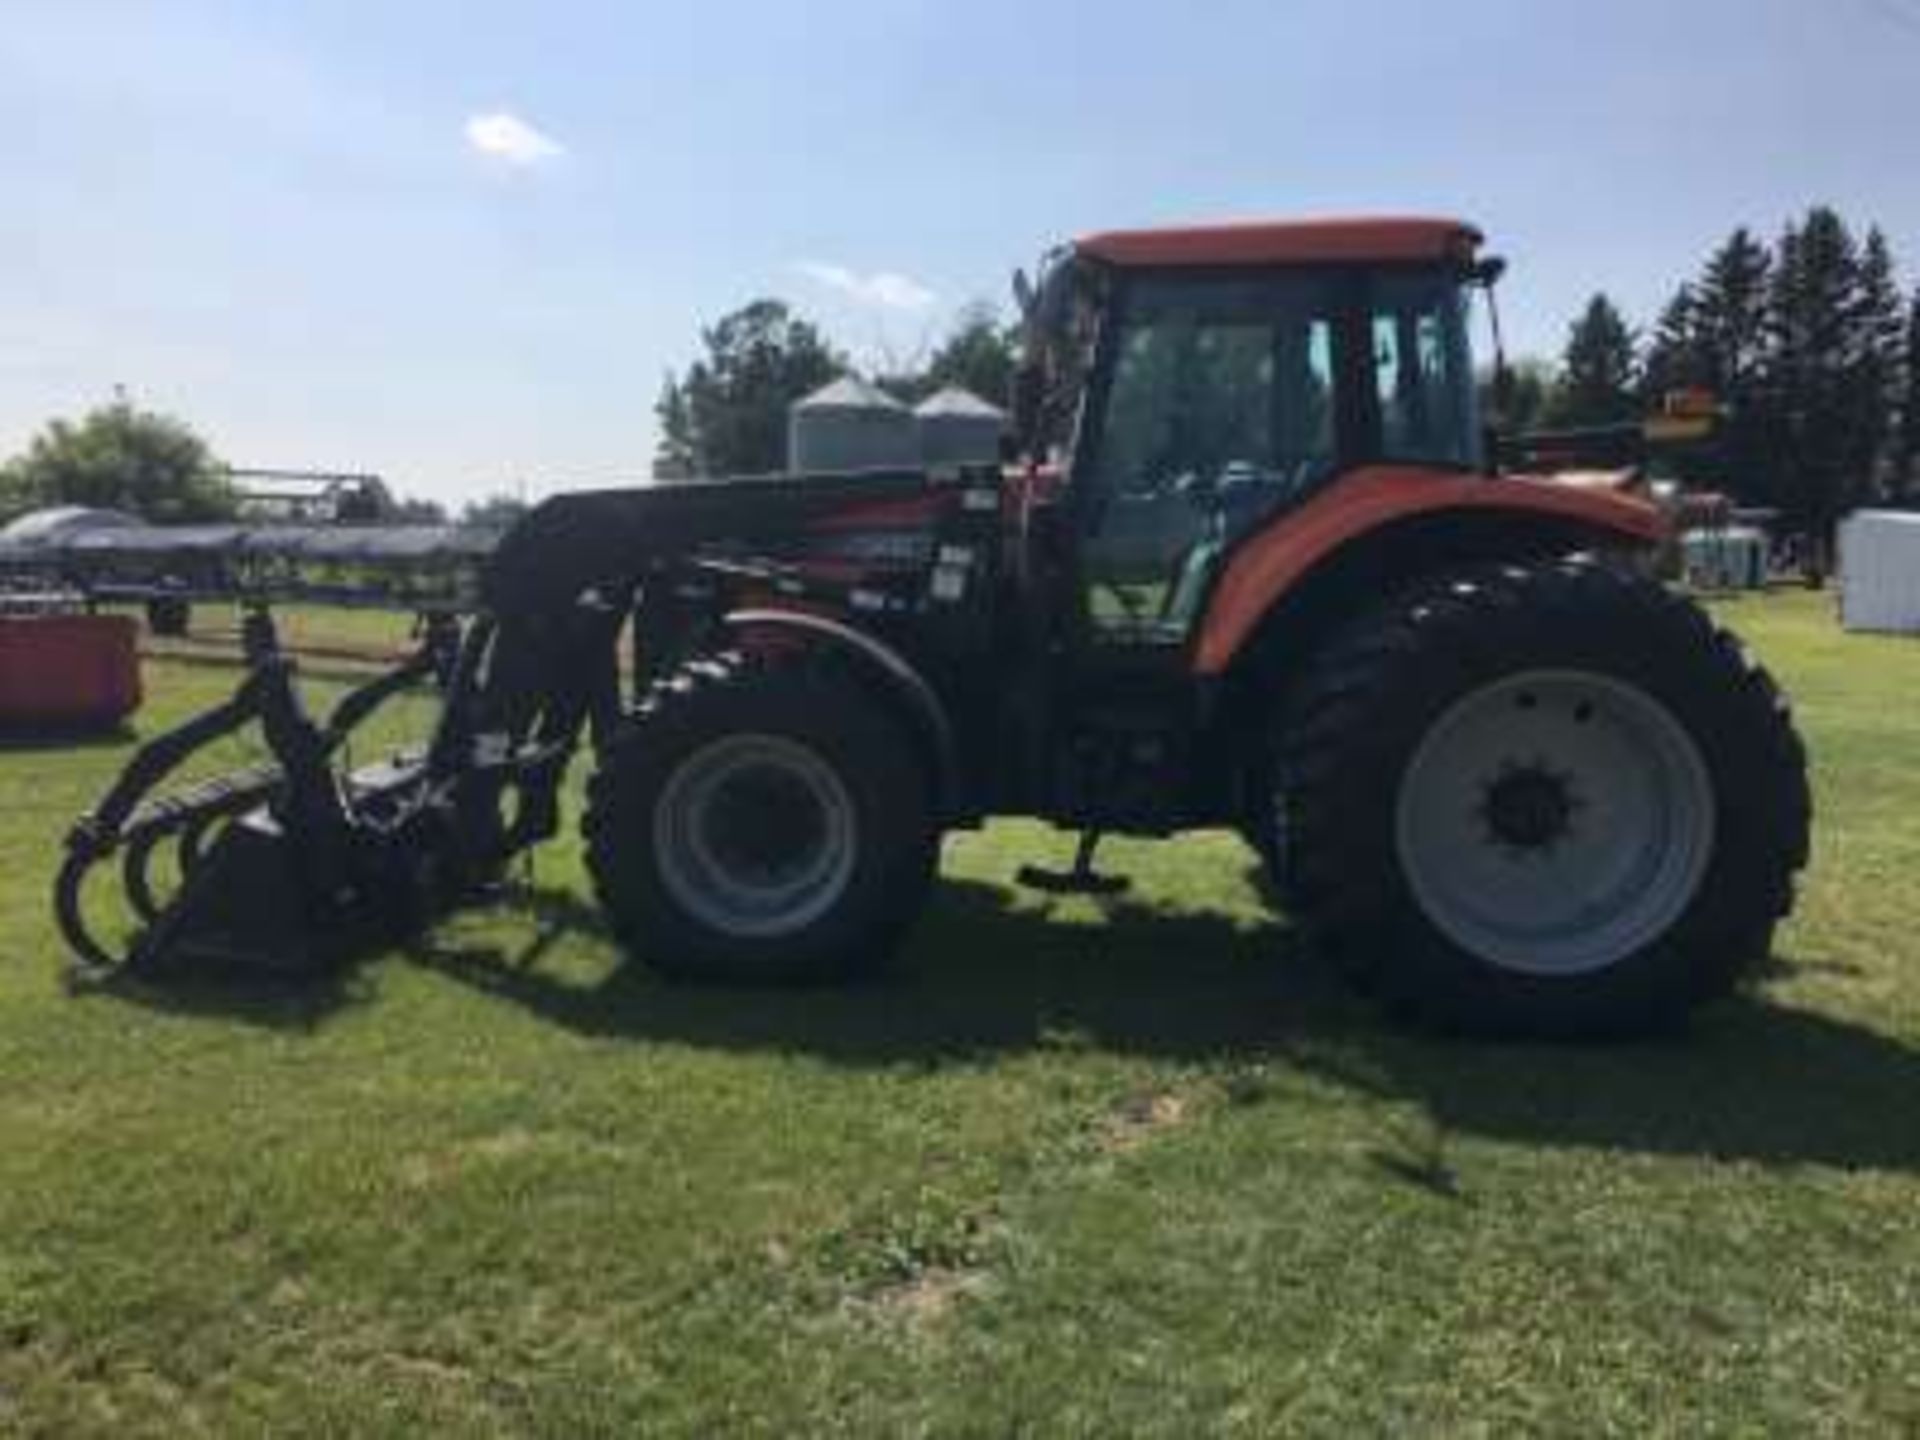 2004 AGCO RT130 FWA Tractor, 4700hrs, pwr shift, 480-R80-38 duals (excellent) 4 hyds, joy stick - Image 9 of 9